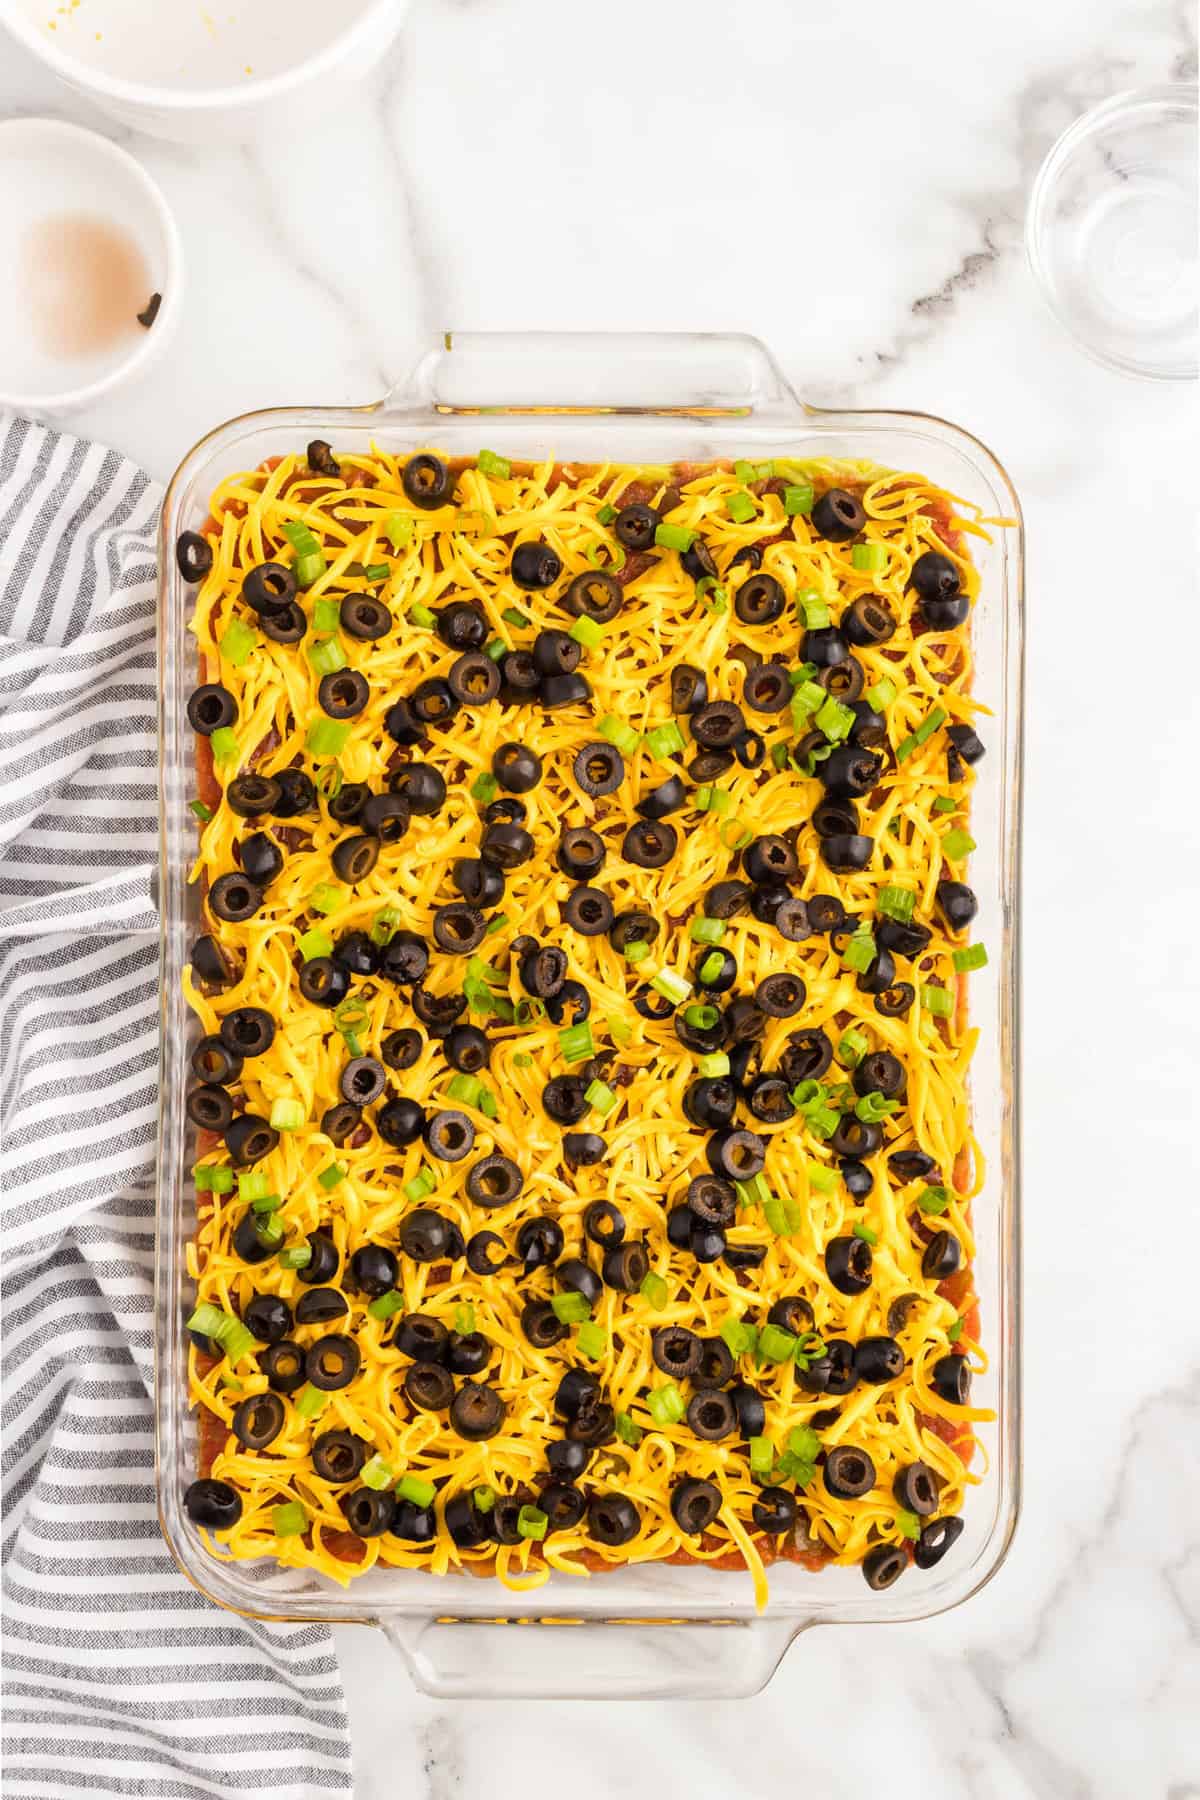 Topping 7 layer dip with sliced black olives and chopped green onion in glass serving dish